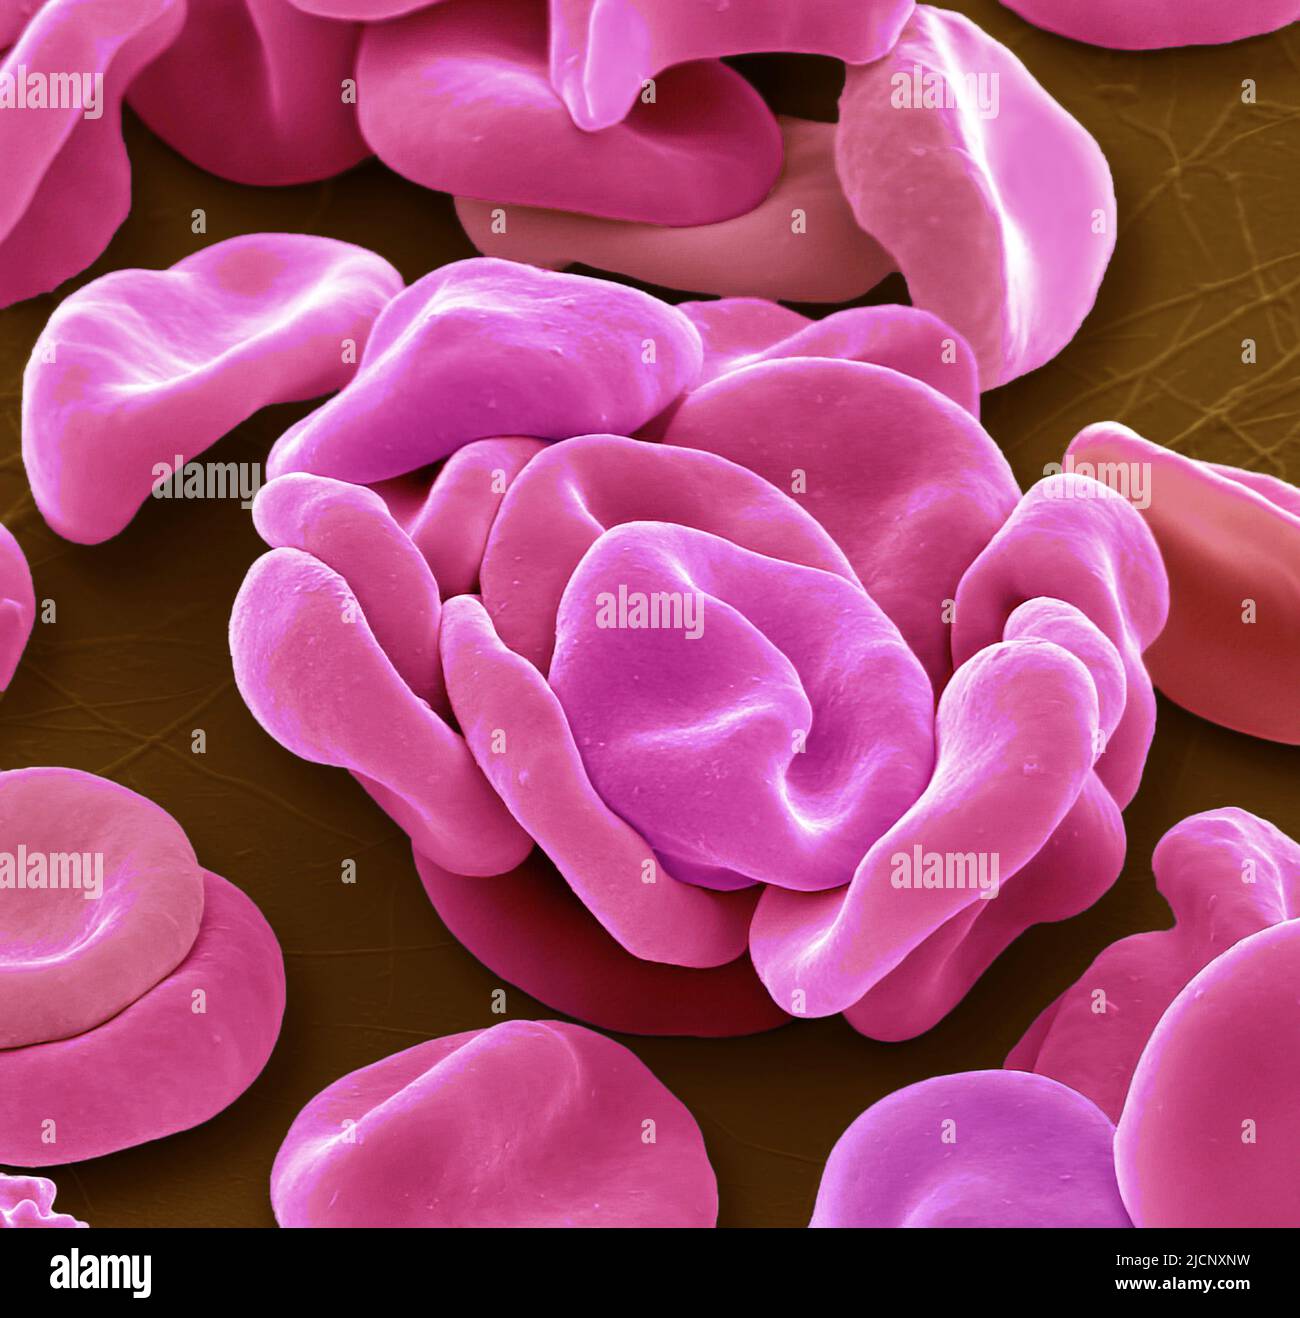 Red blood cells. Coloured scanning electron micrograph (SEM) of red ...